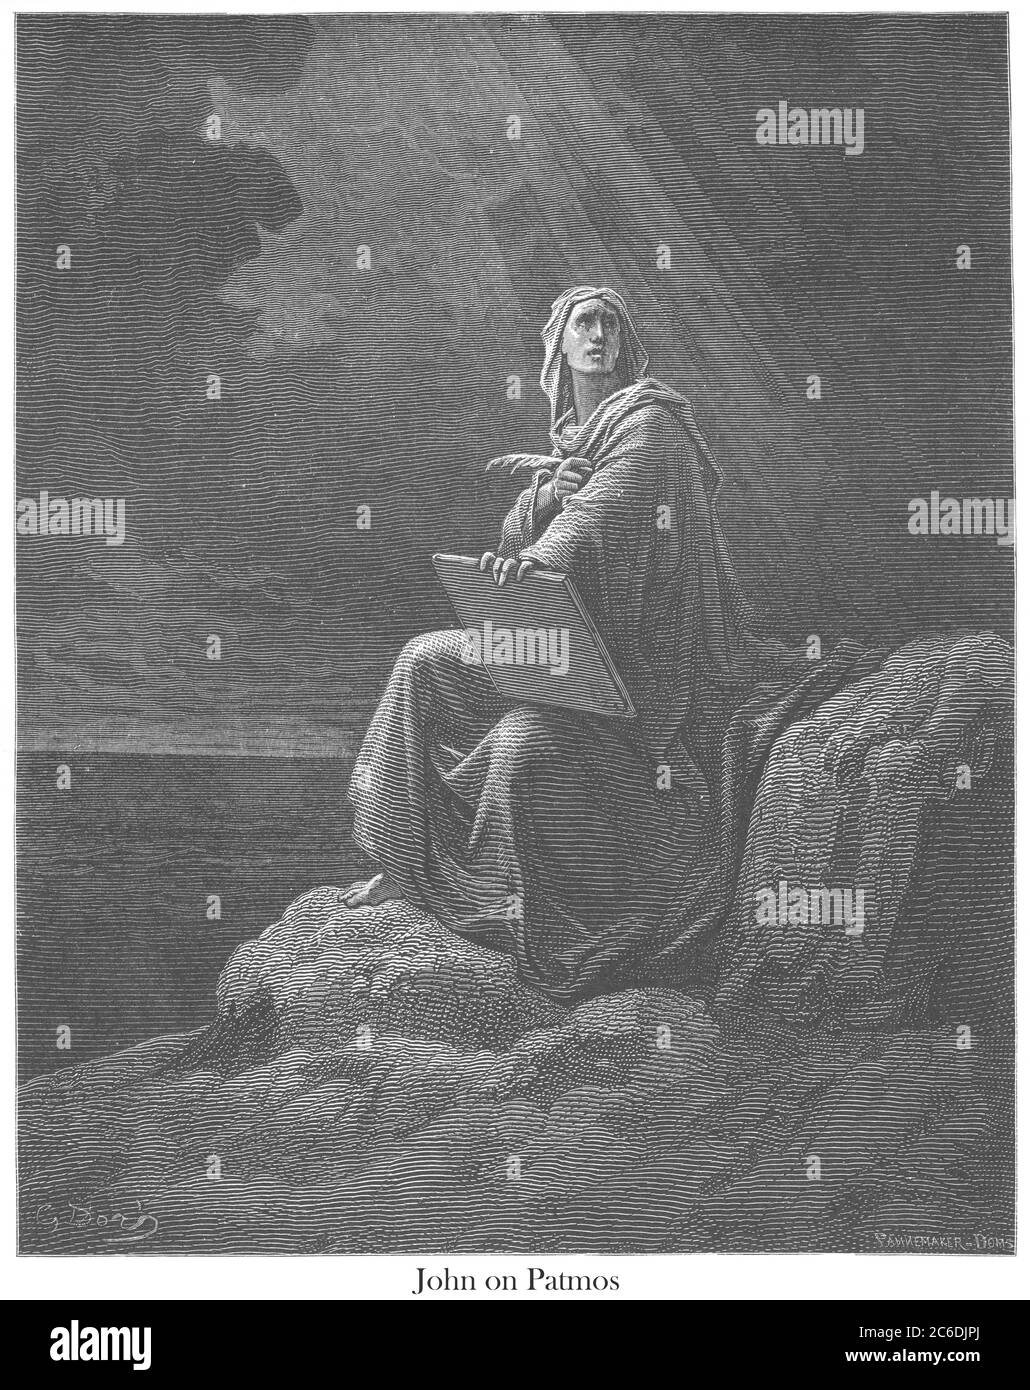 St. John at Patmos [Revelation 1:9] From the book 'Bible Gallery' Illustrated by Gustave Dore with Memoir of Dore and Descriptive Letter-press by Talbot W. Chambers D.D. Published by Cassell & Company Limited in London and simultaneously by Mame in Tours, France in 1866 Stock Photo